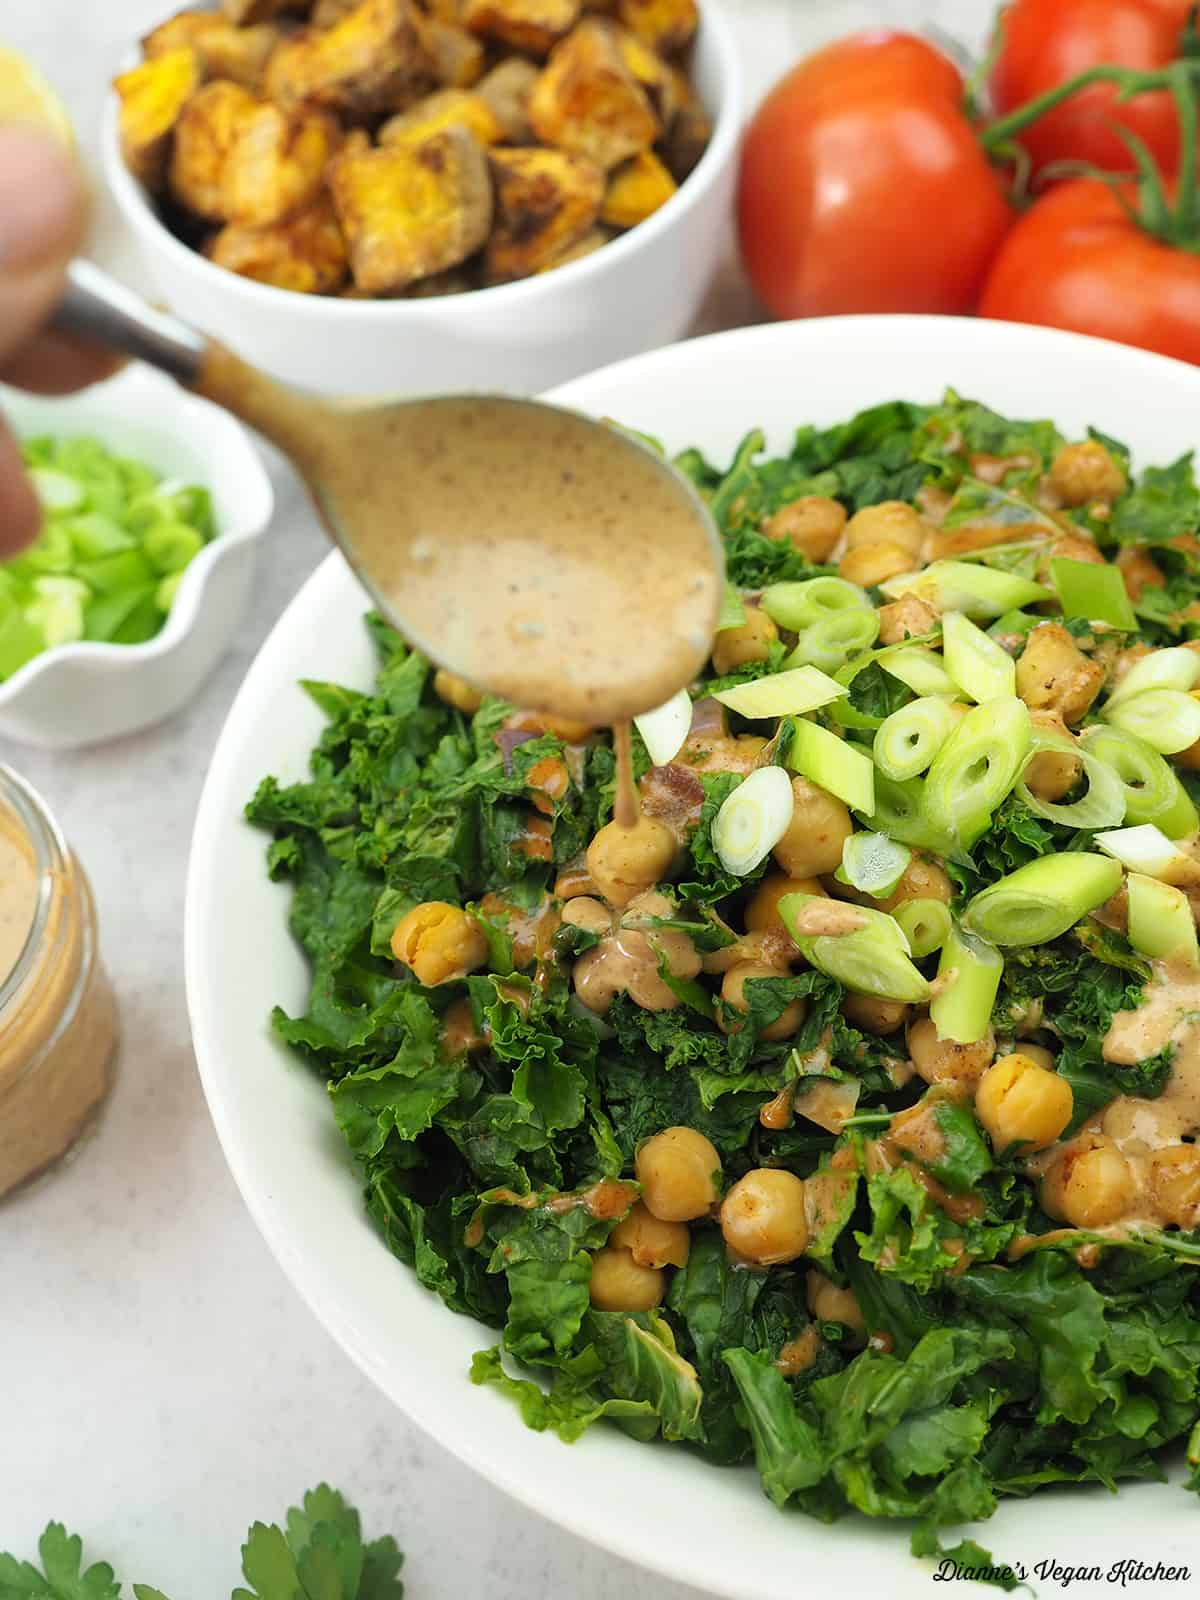 spooning miso peanut drizzle onto kale and chickpeas